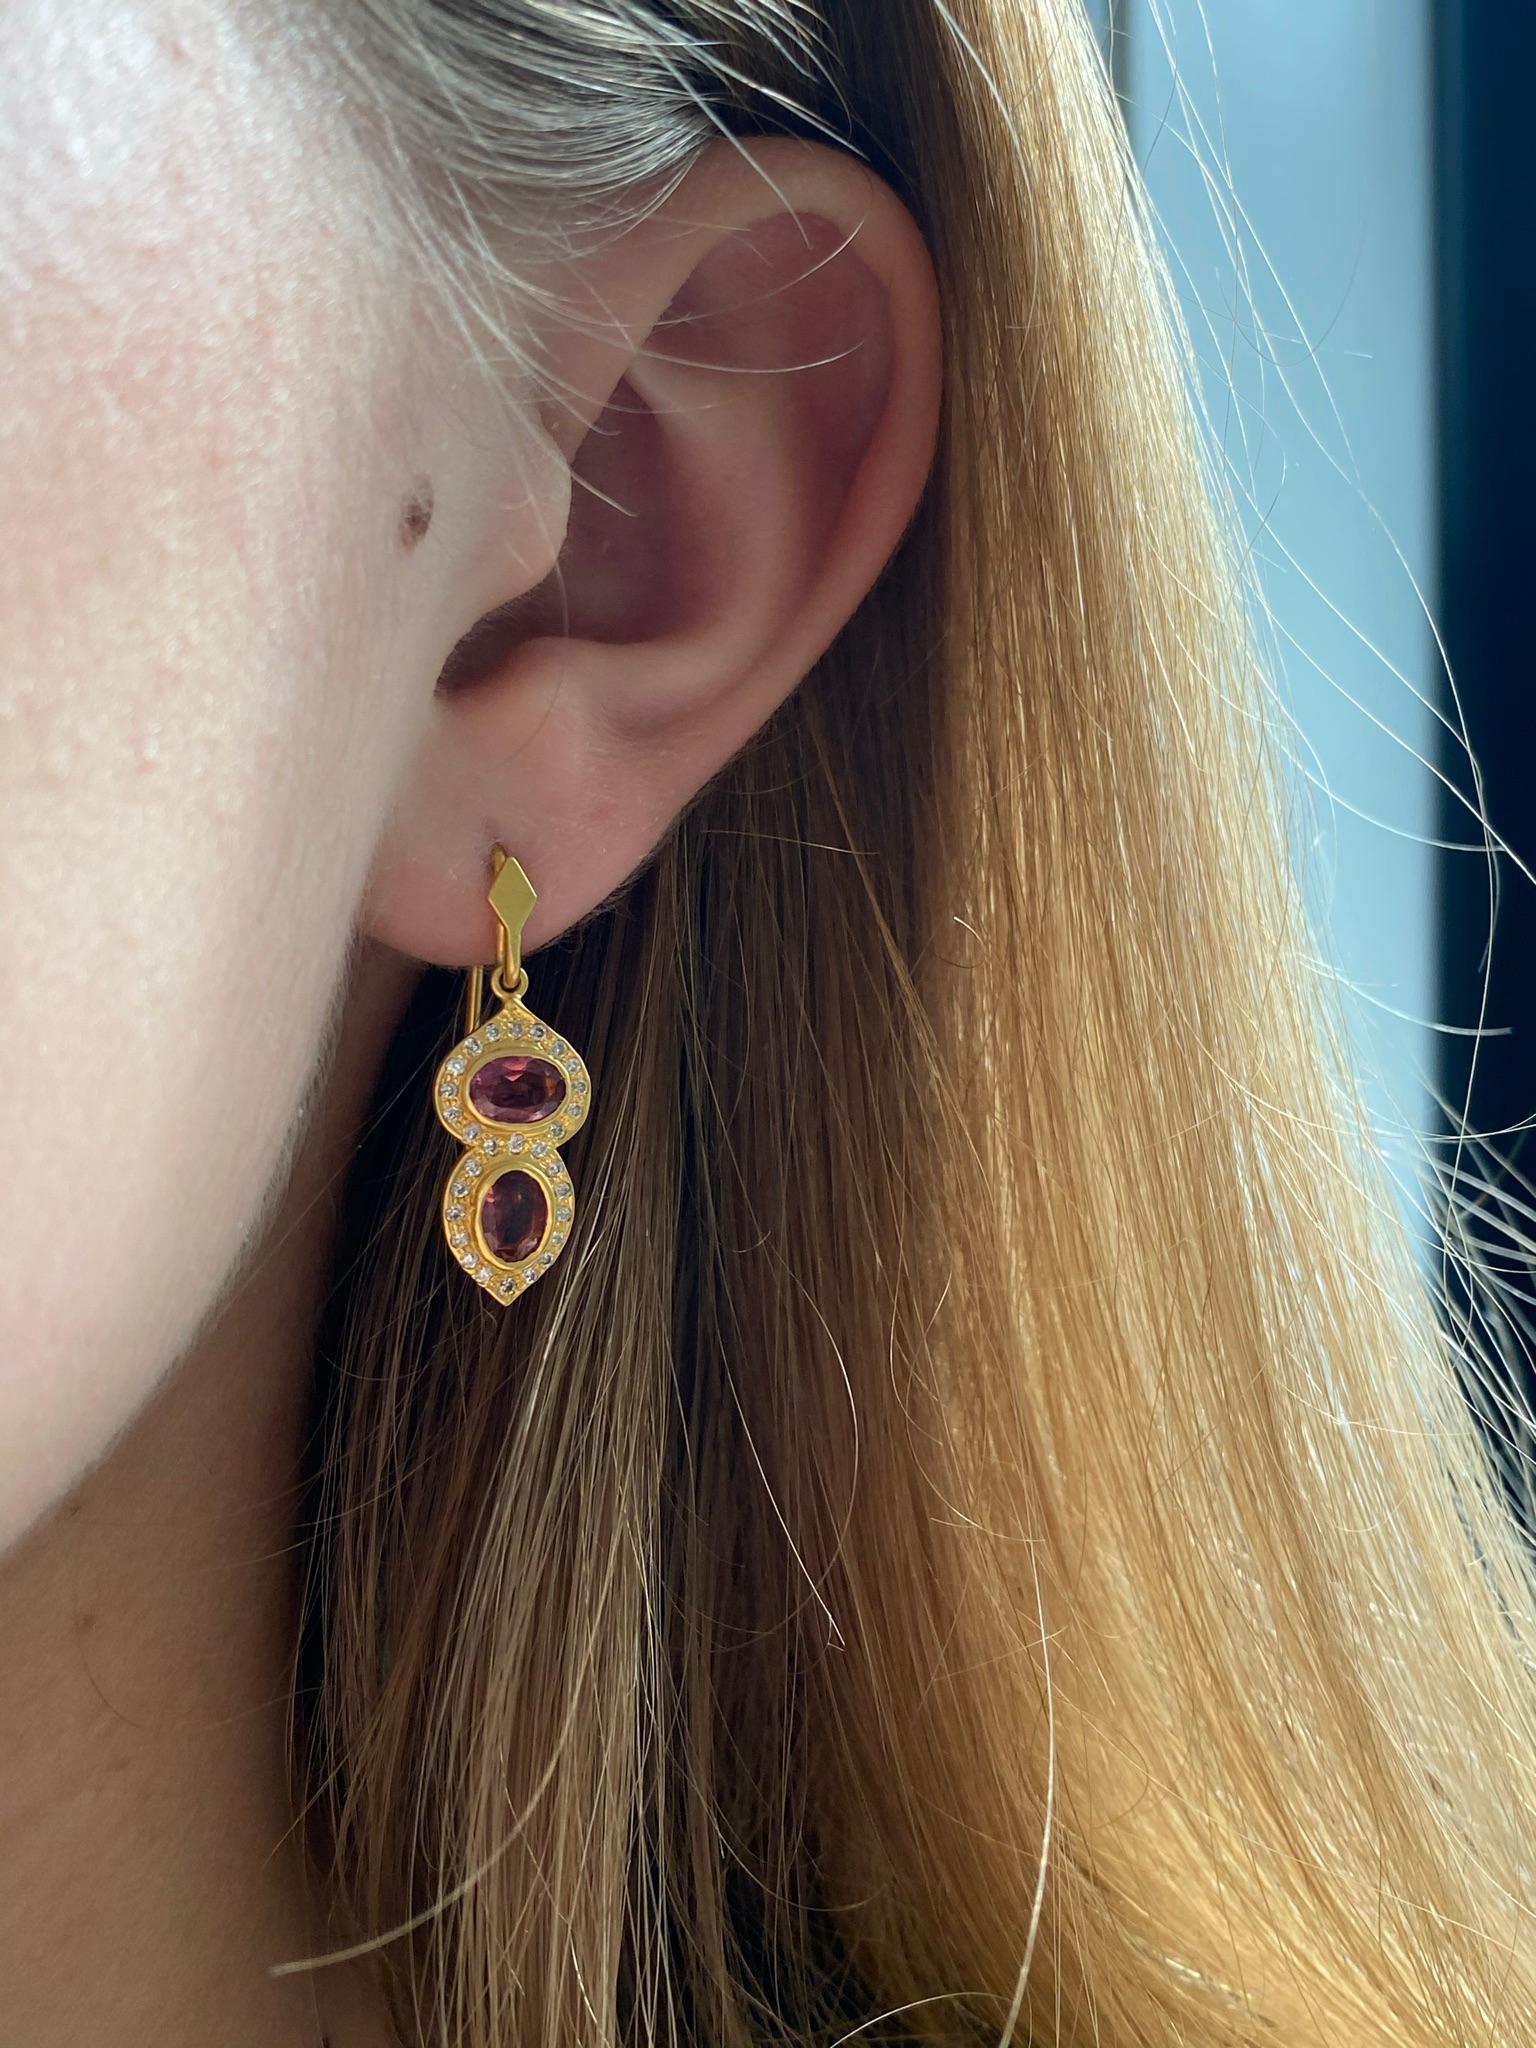 Designed by award winning jewelry designer, Lauren Harper, these hand made Pink Tourmaline and .46ct diamond earrings are simple and stunning. Finished in Harper's signature matte 18kt Gold, they are perfect for daytime or evening wear.  Earrings